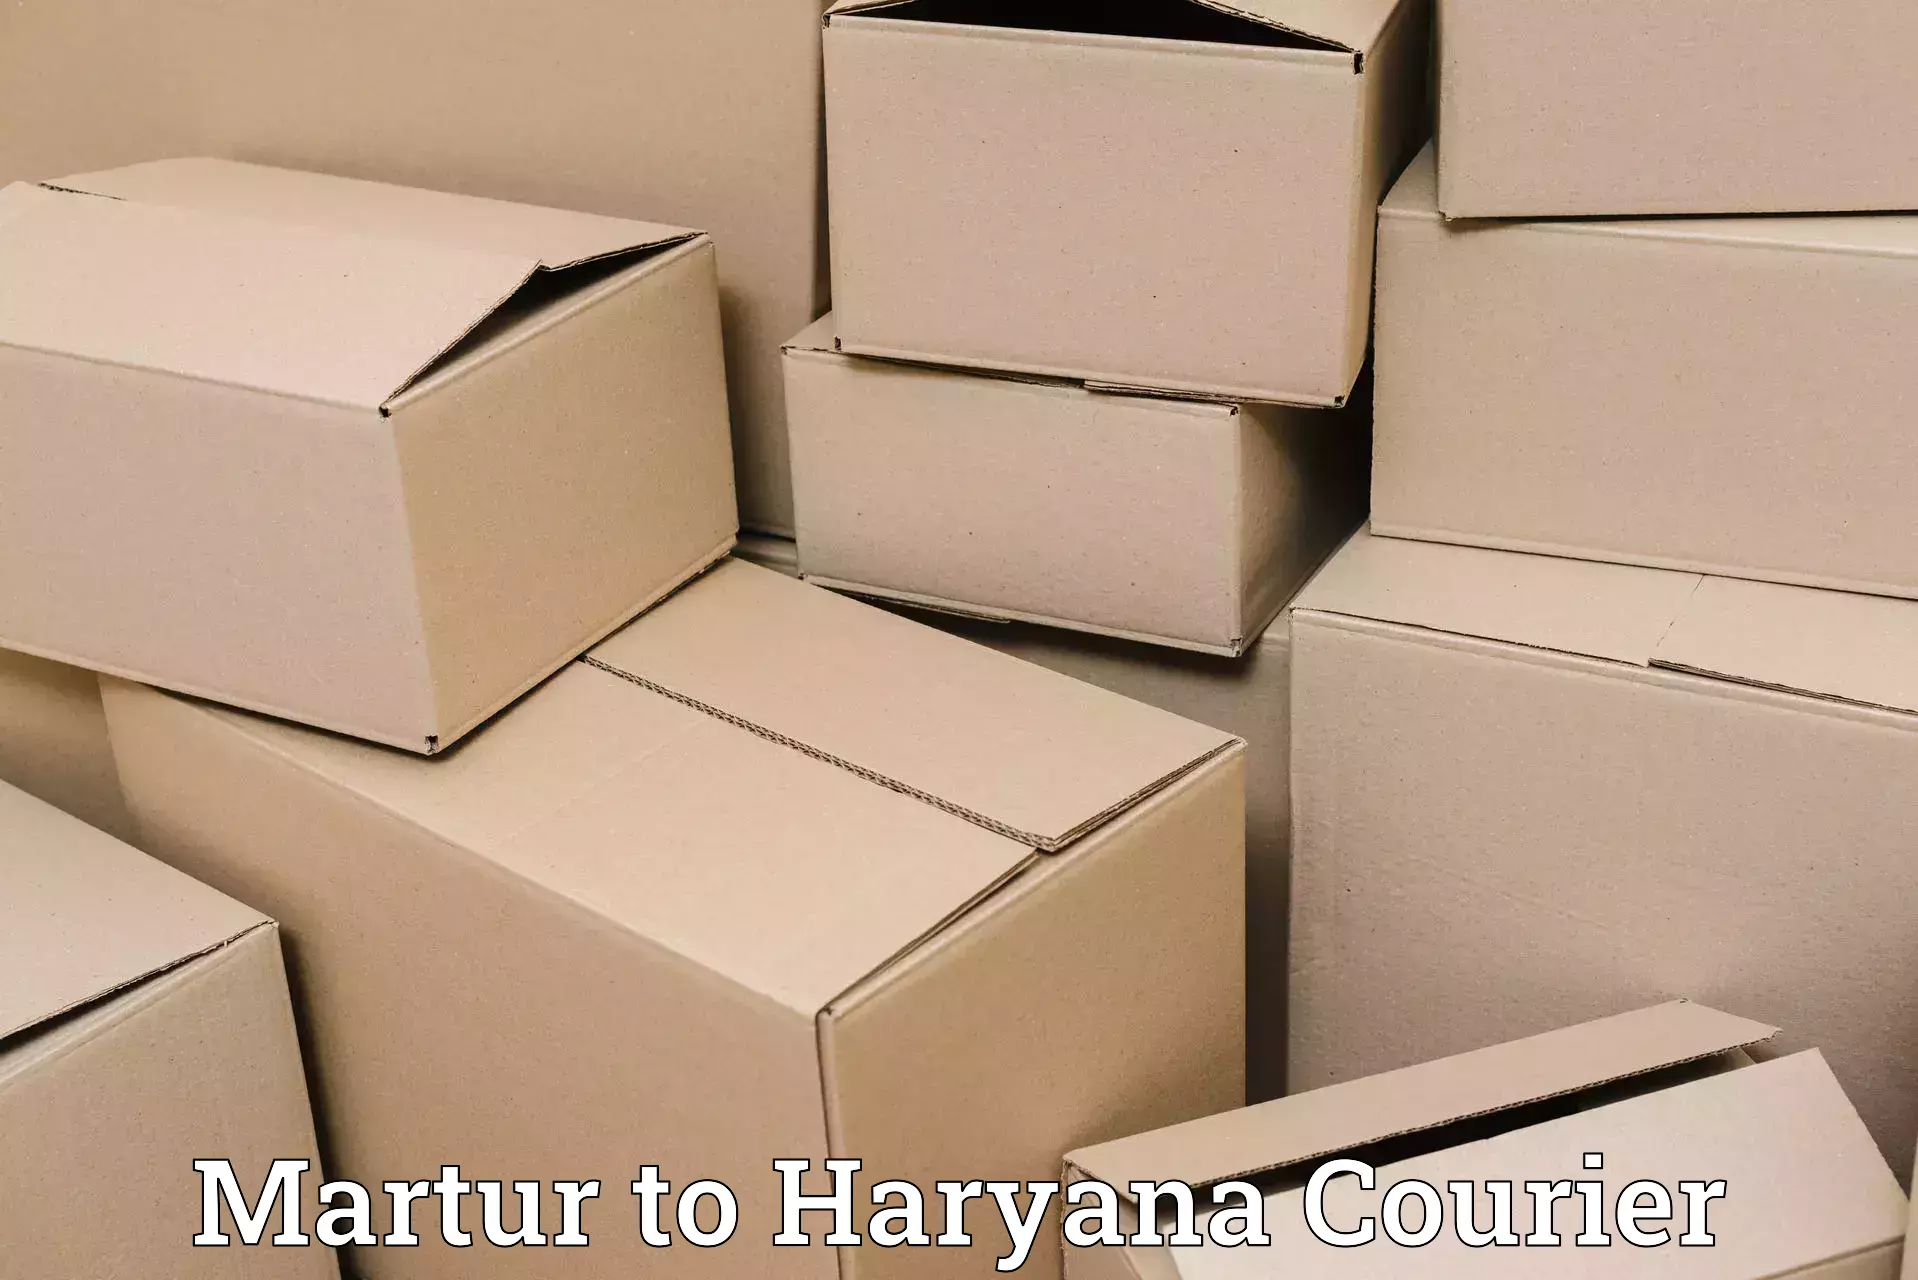 International courier networks Martur to Haryana